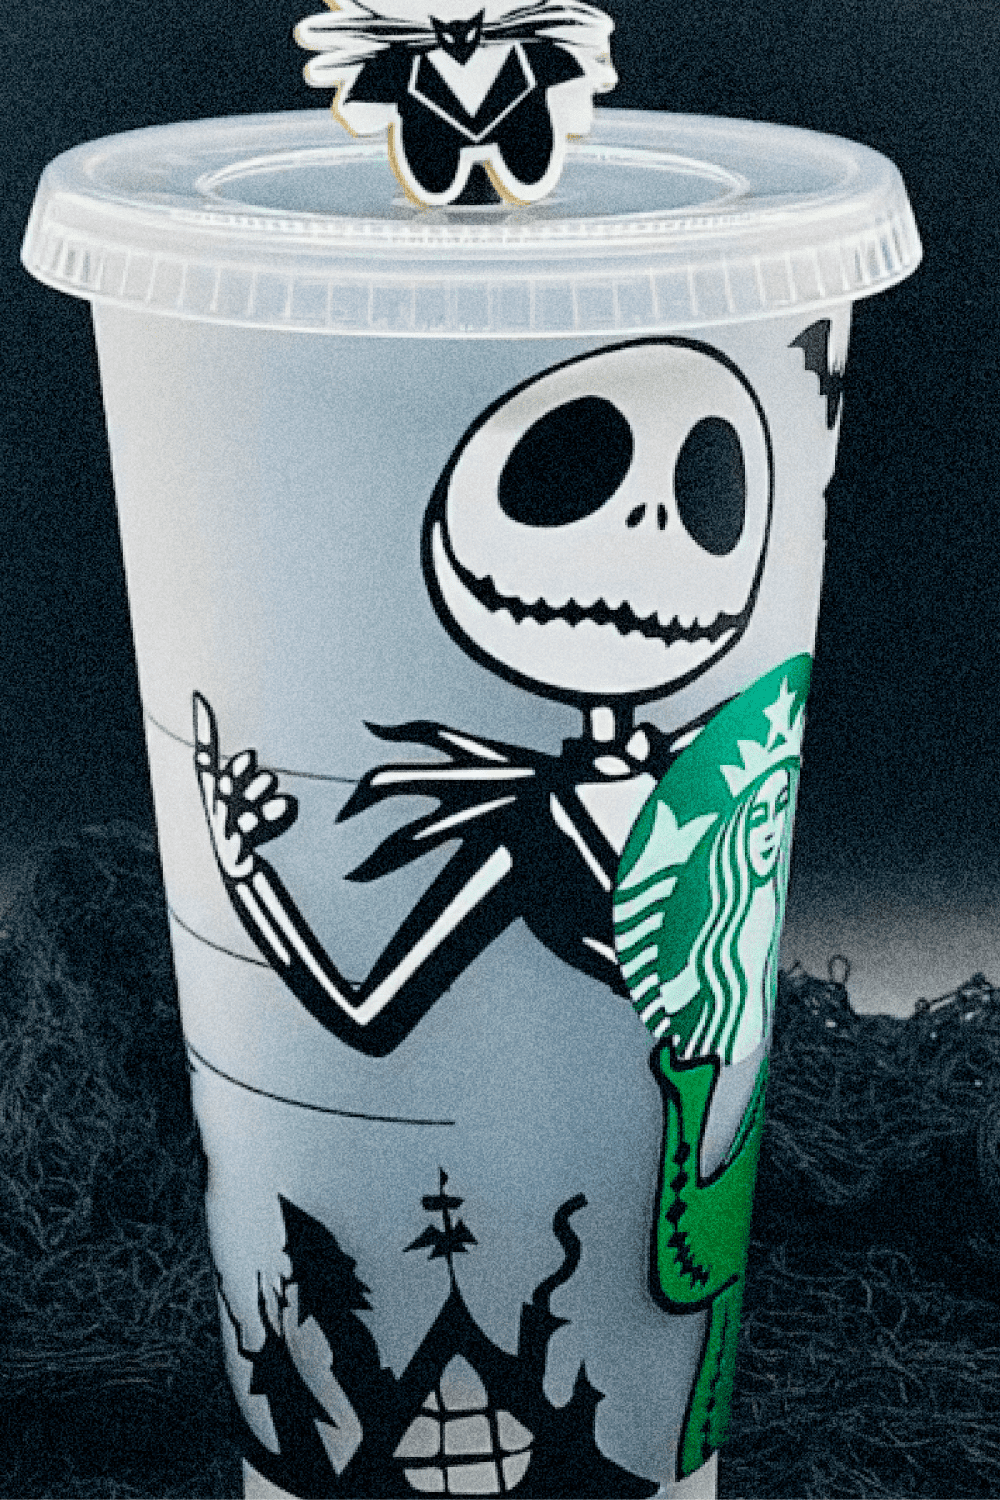 Starbucks Is Releasing A Nightmare Before Christmas Tumbler and